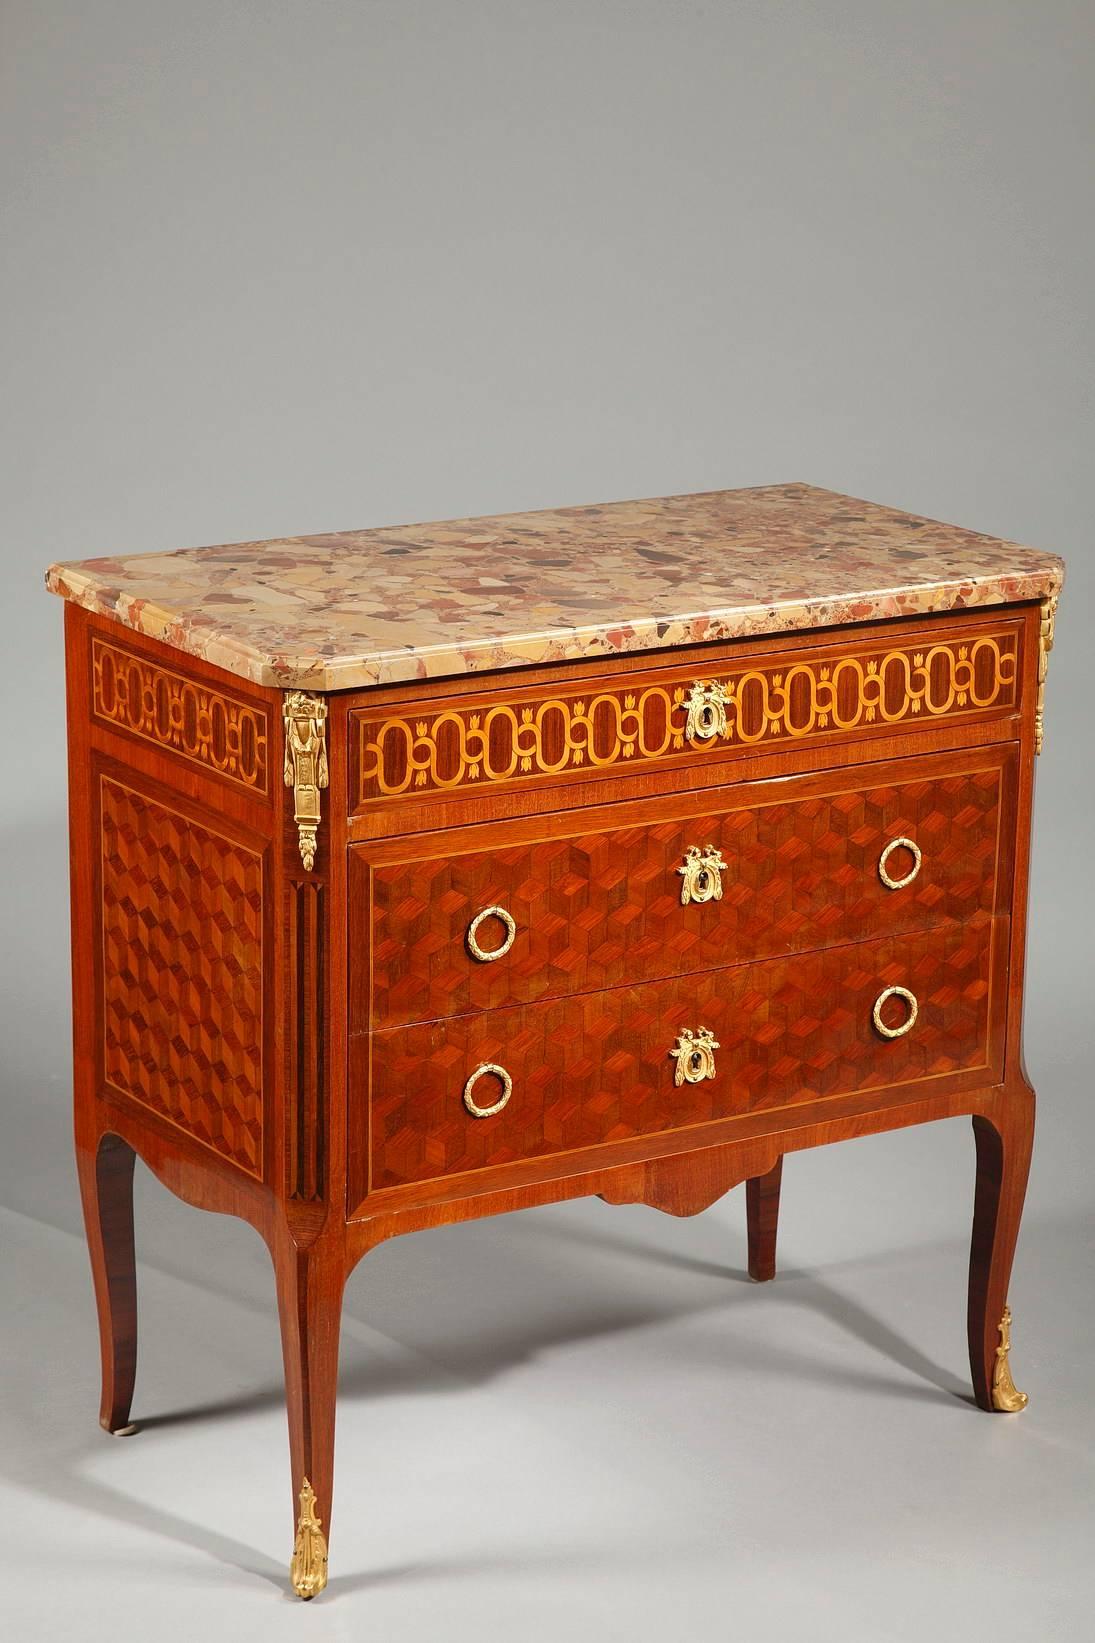 Transitional Style Ormolu-Mounted Marquetry Commode, 19th Century (Louis XVI.)